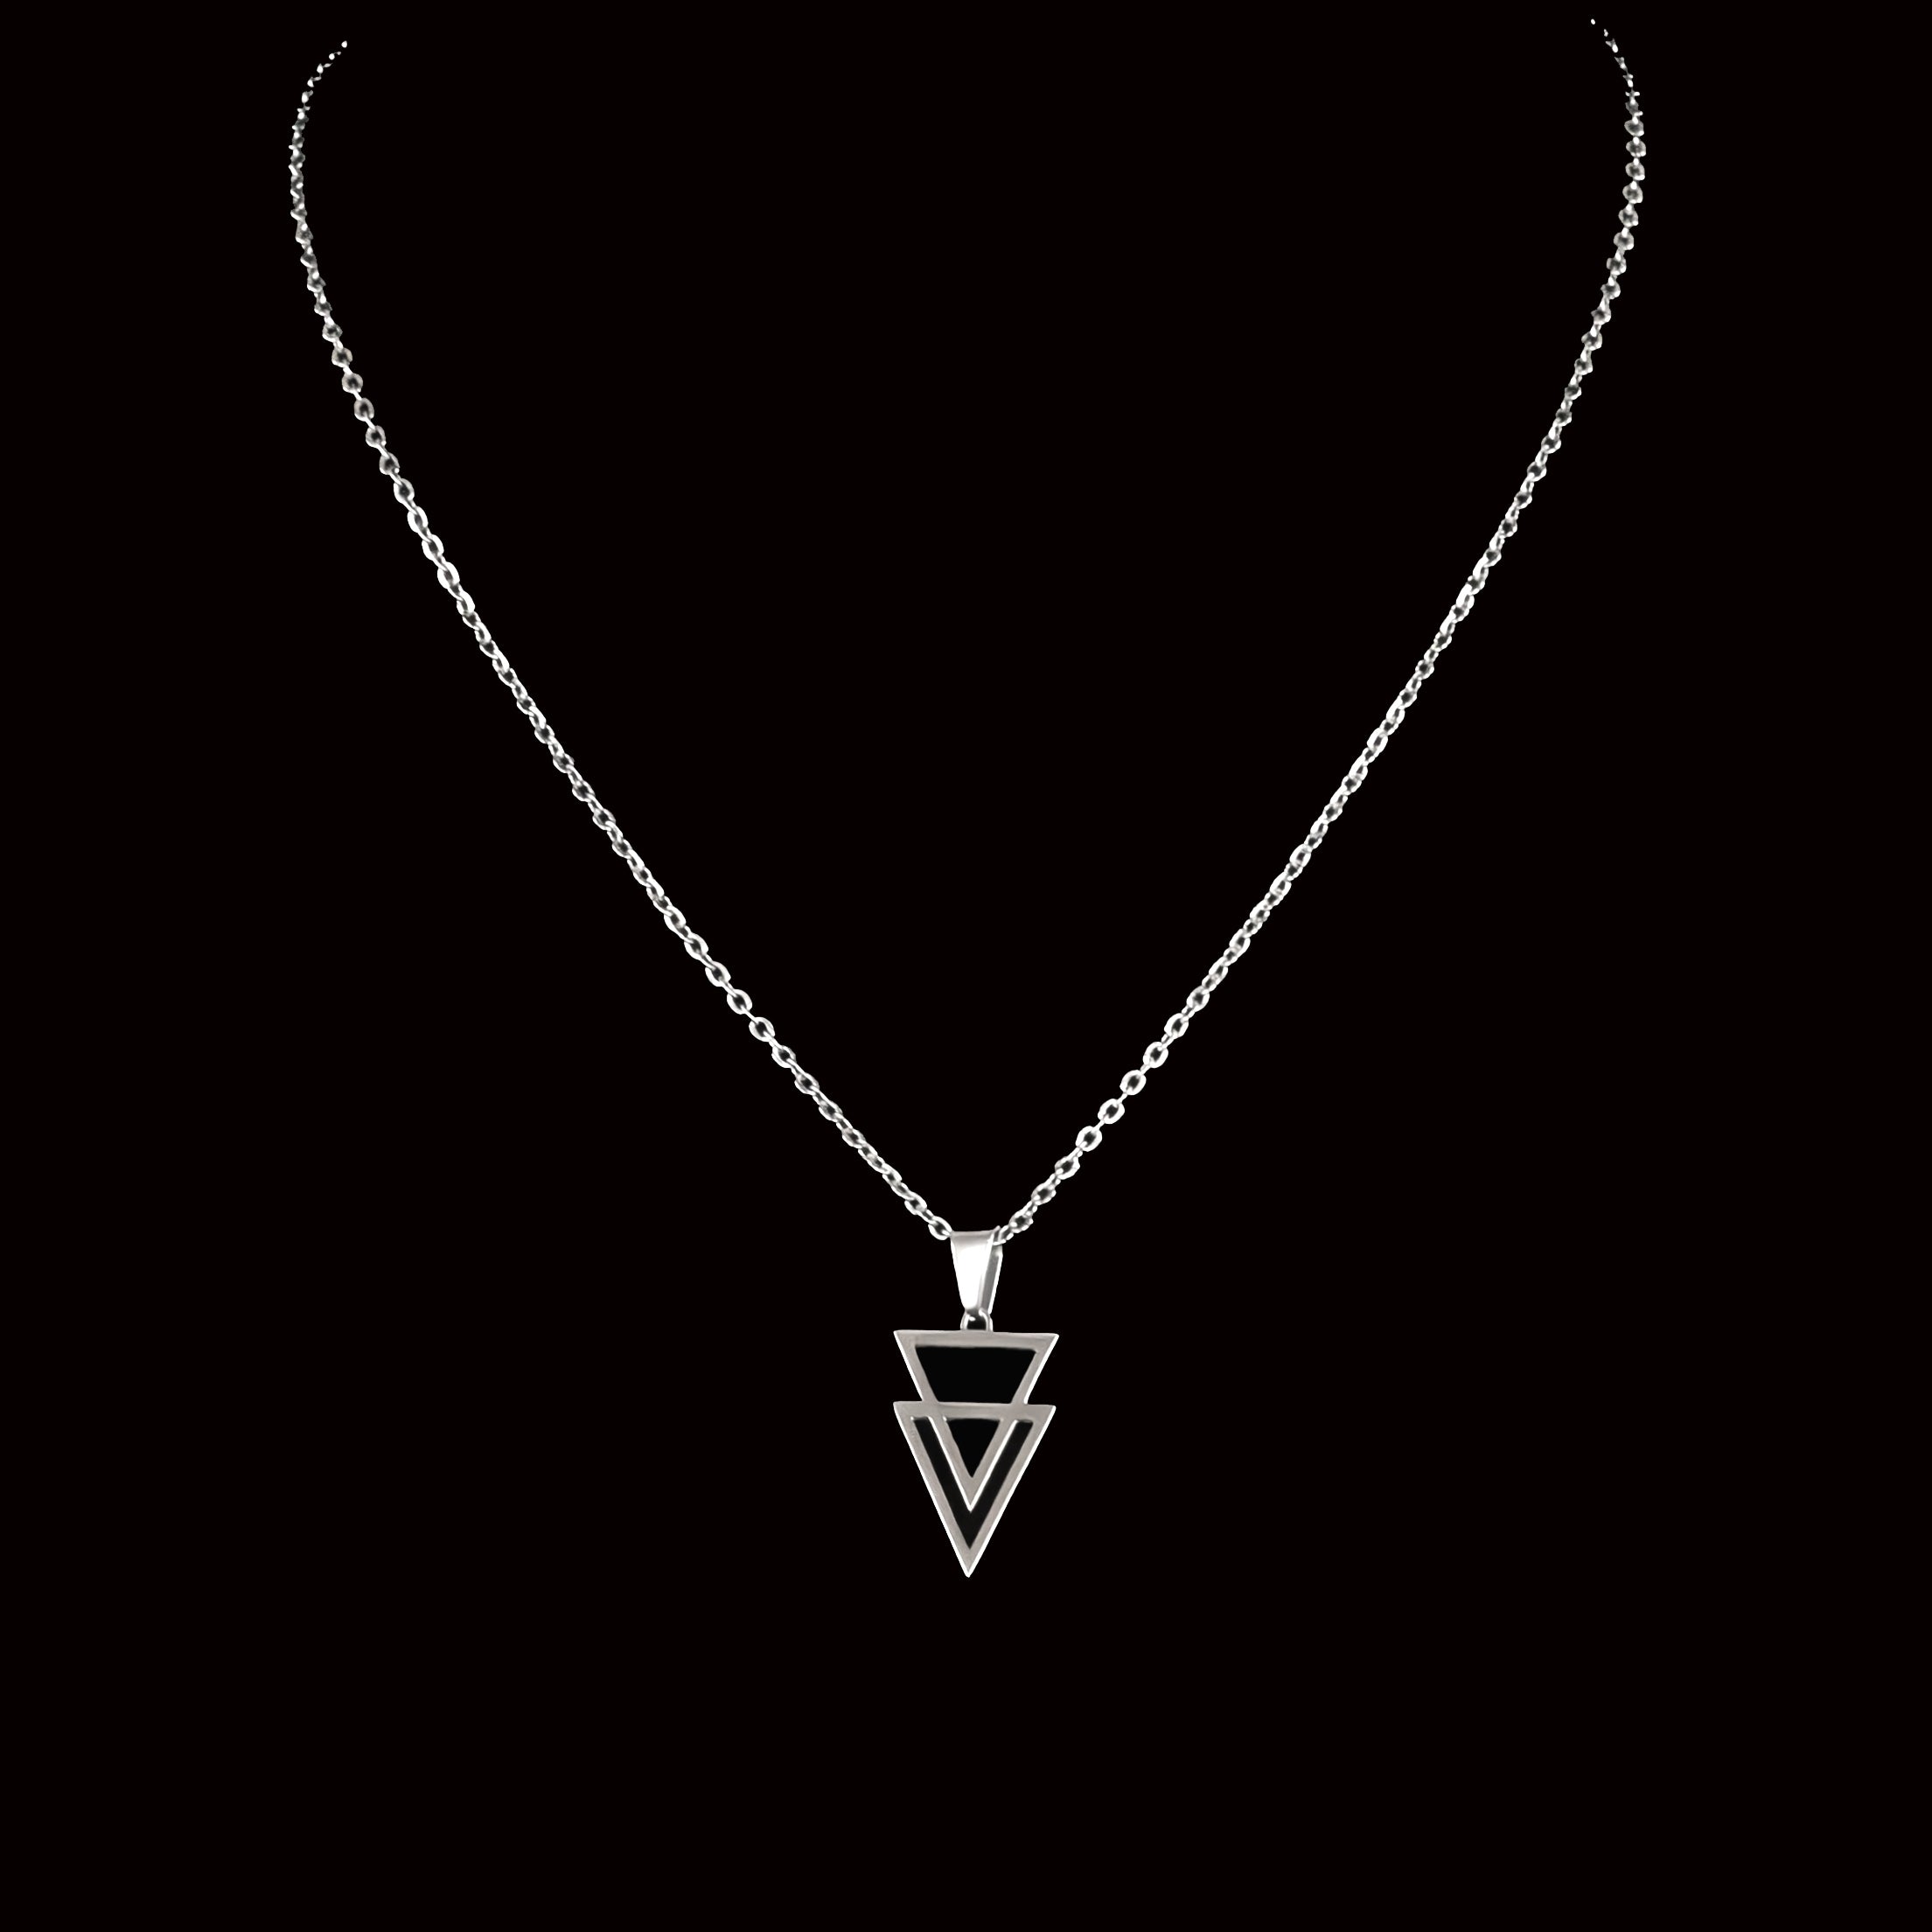 Jakob Stainless Steel Necklace with Triangle Pendant